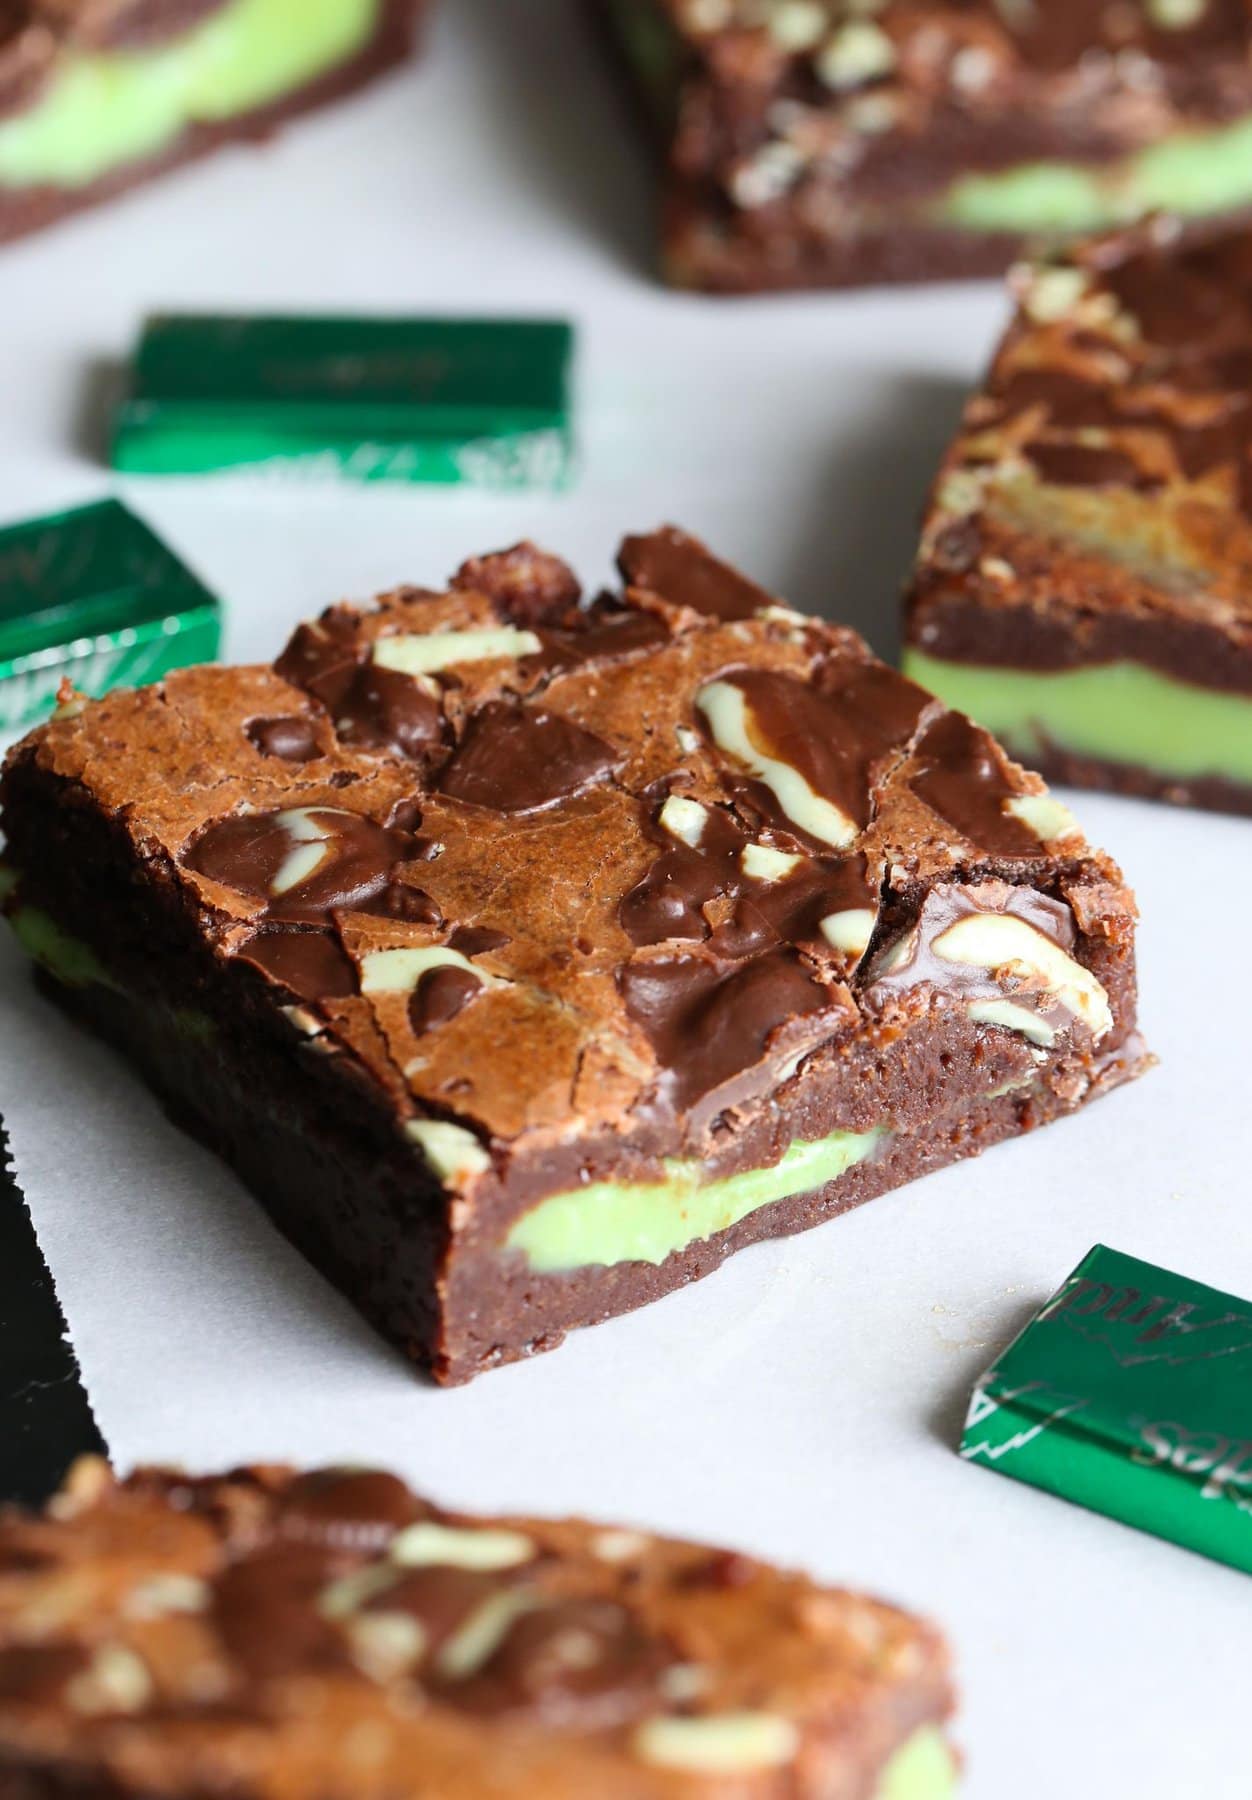 An assortment of mint fudge stuffed brownies surrounded by mint chocolate candies.